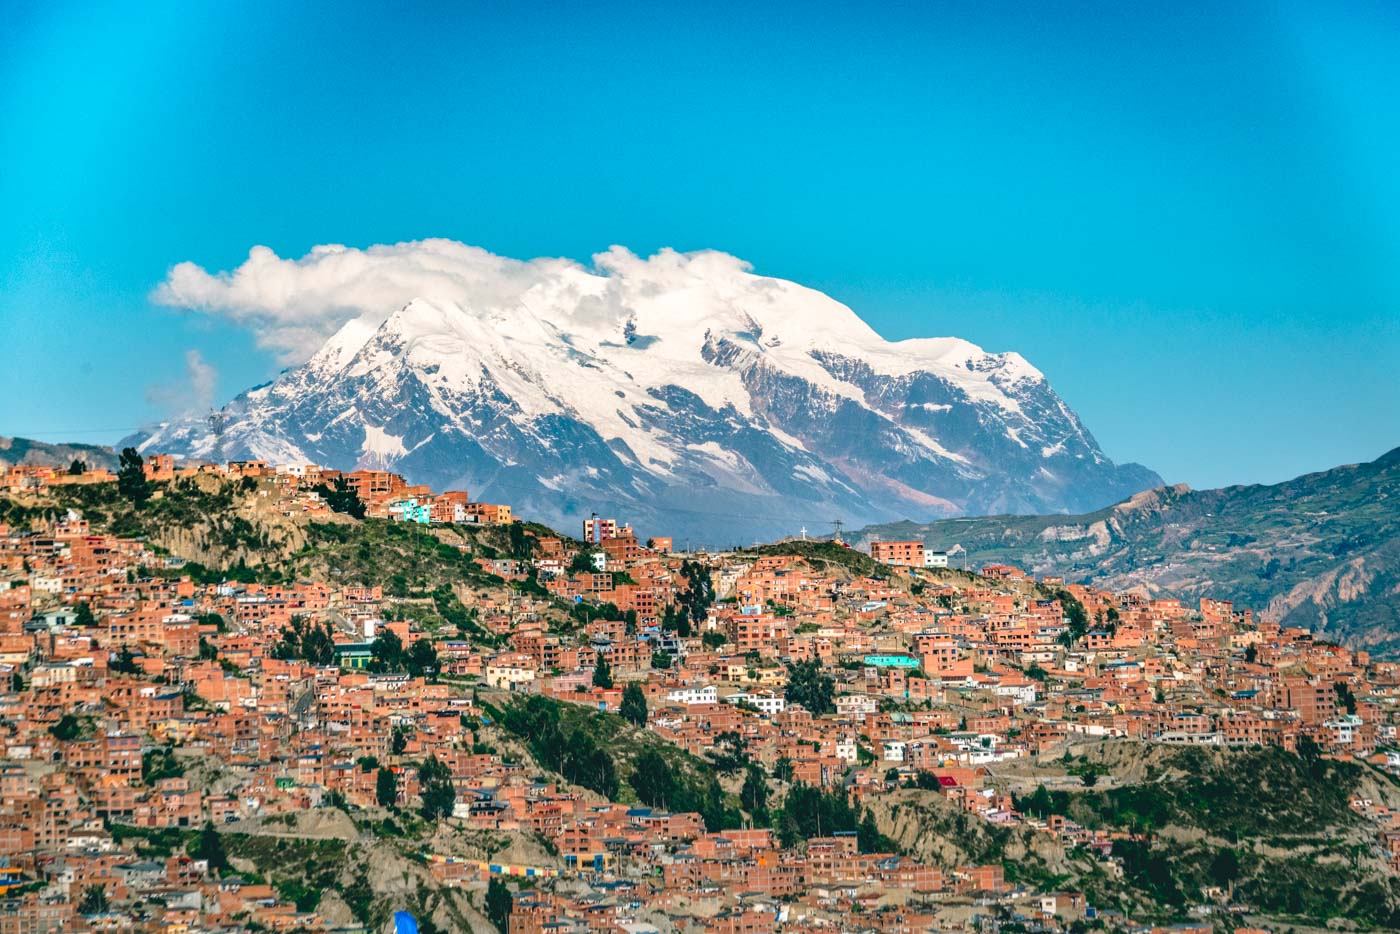 Sunday City Guide: Things to Do in La Paz, Bolivia